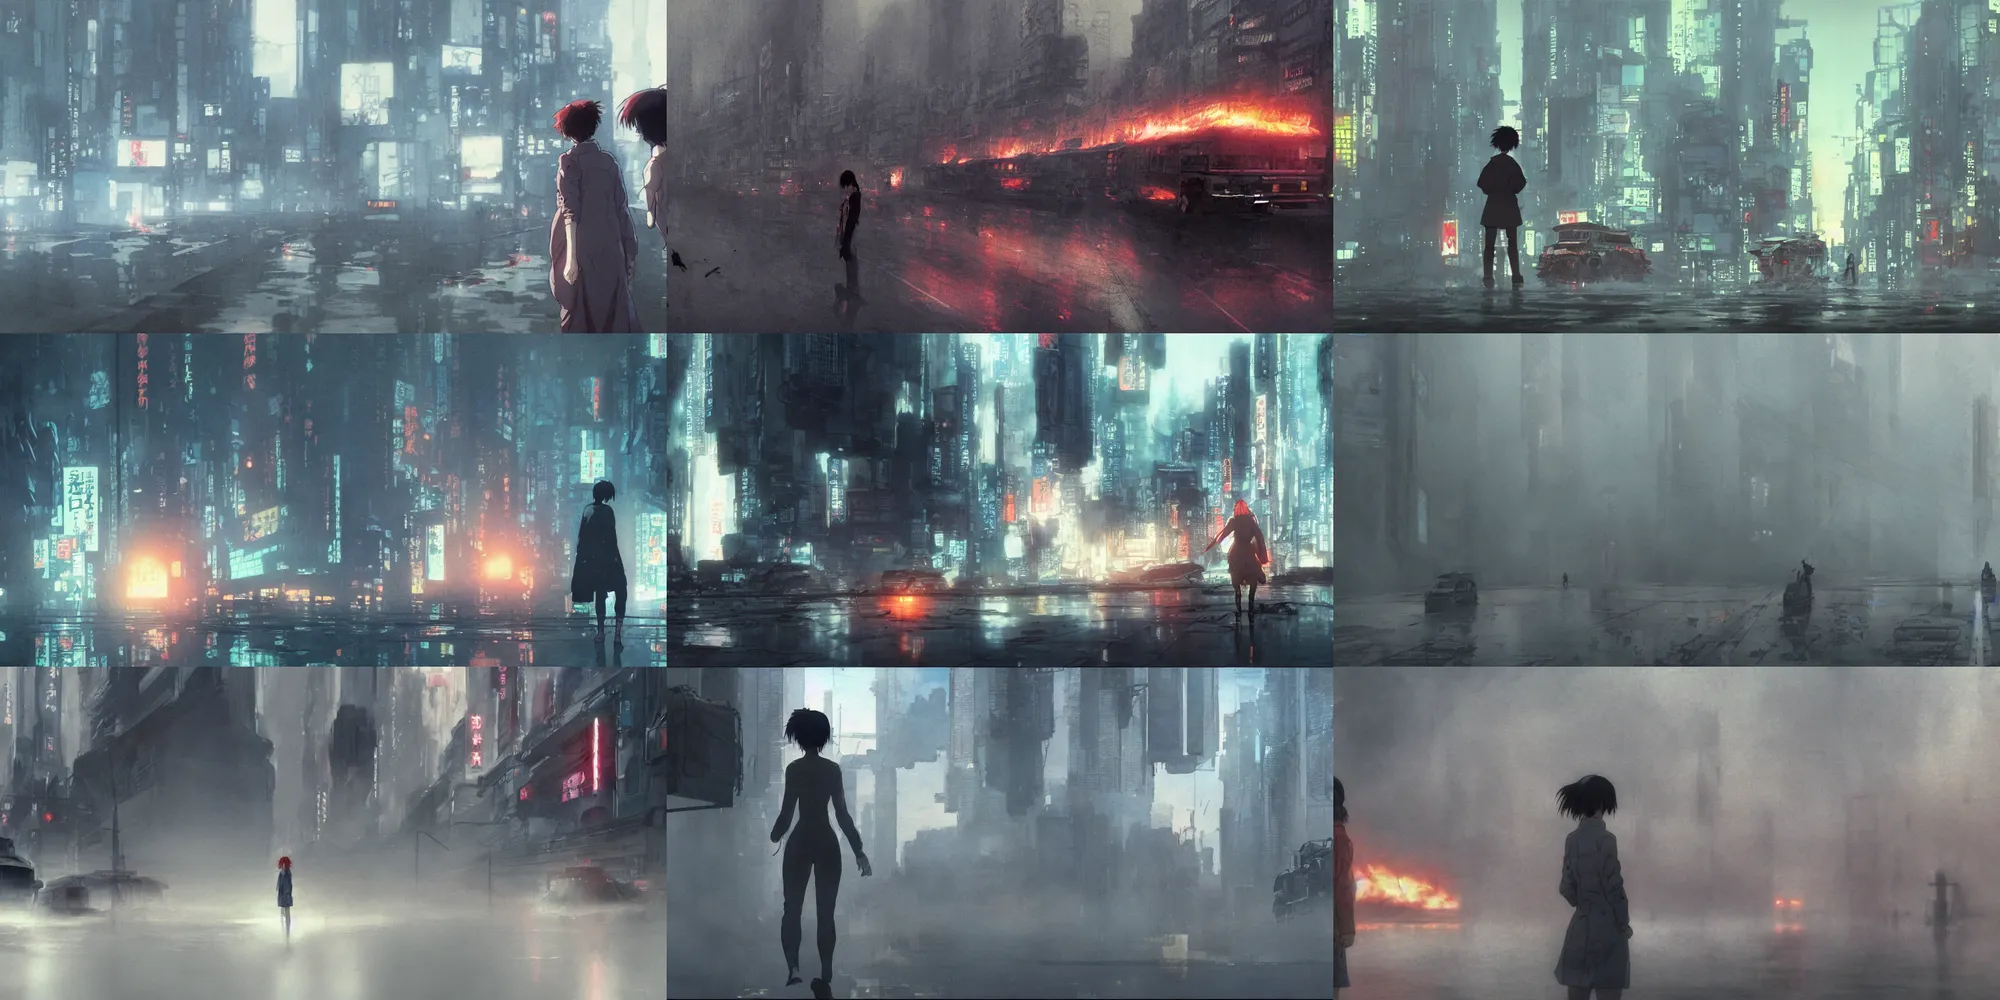 Prompt: incredible wide screenshot, ultrawide, simple water color, paper texture, katsuhiro otomo ghost in the shell anime movie scene, back lit vertigo fear of heights, action shot girl in parka, wet dark road, parasol, giant robot skull, earthquake destruction, reflection, thick fog, smoke, destroyed robots, blazing fire, burning bus crash inferno